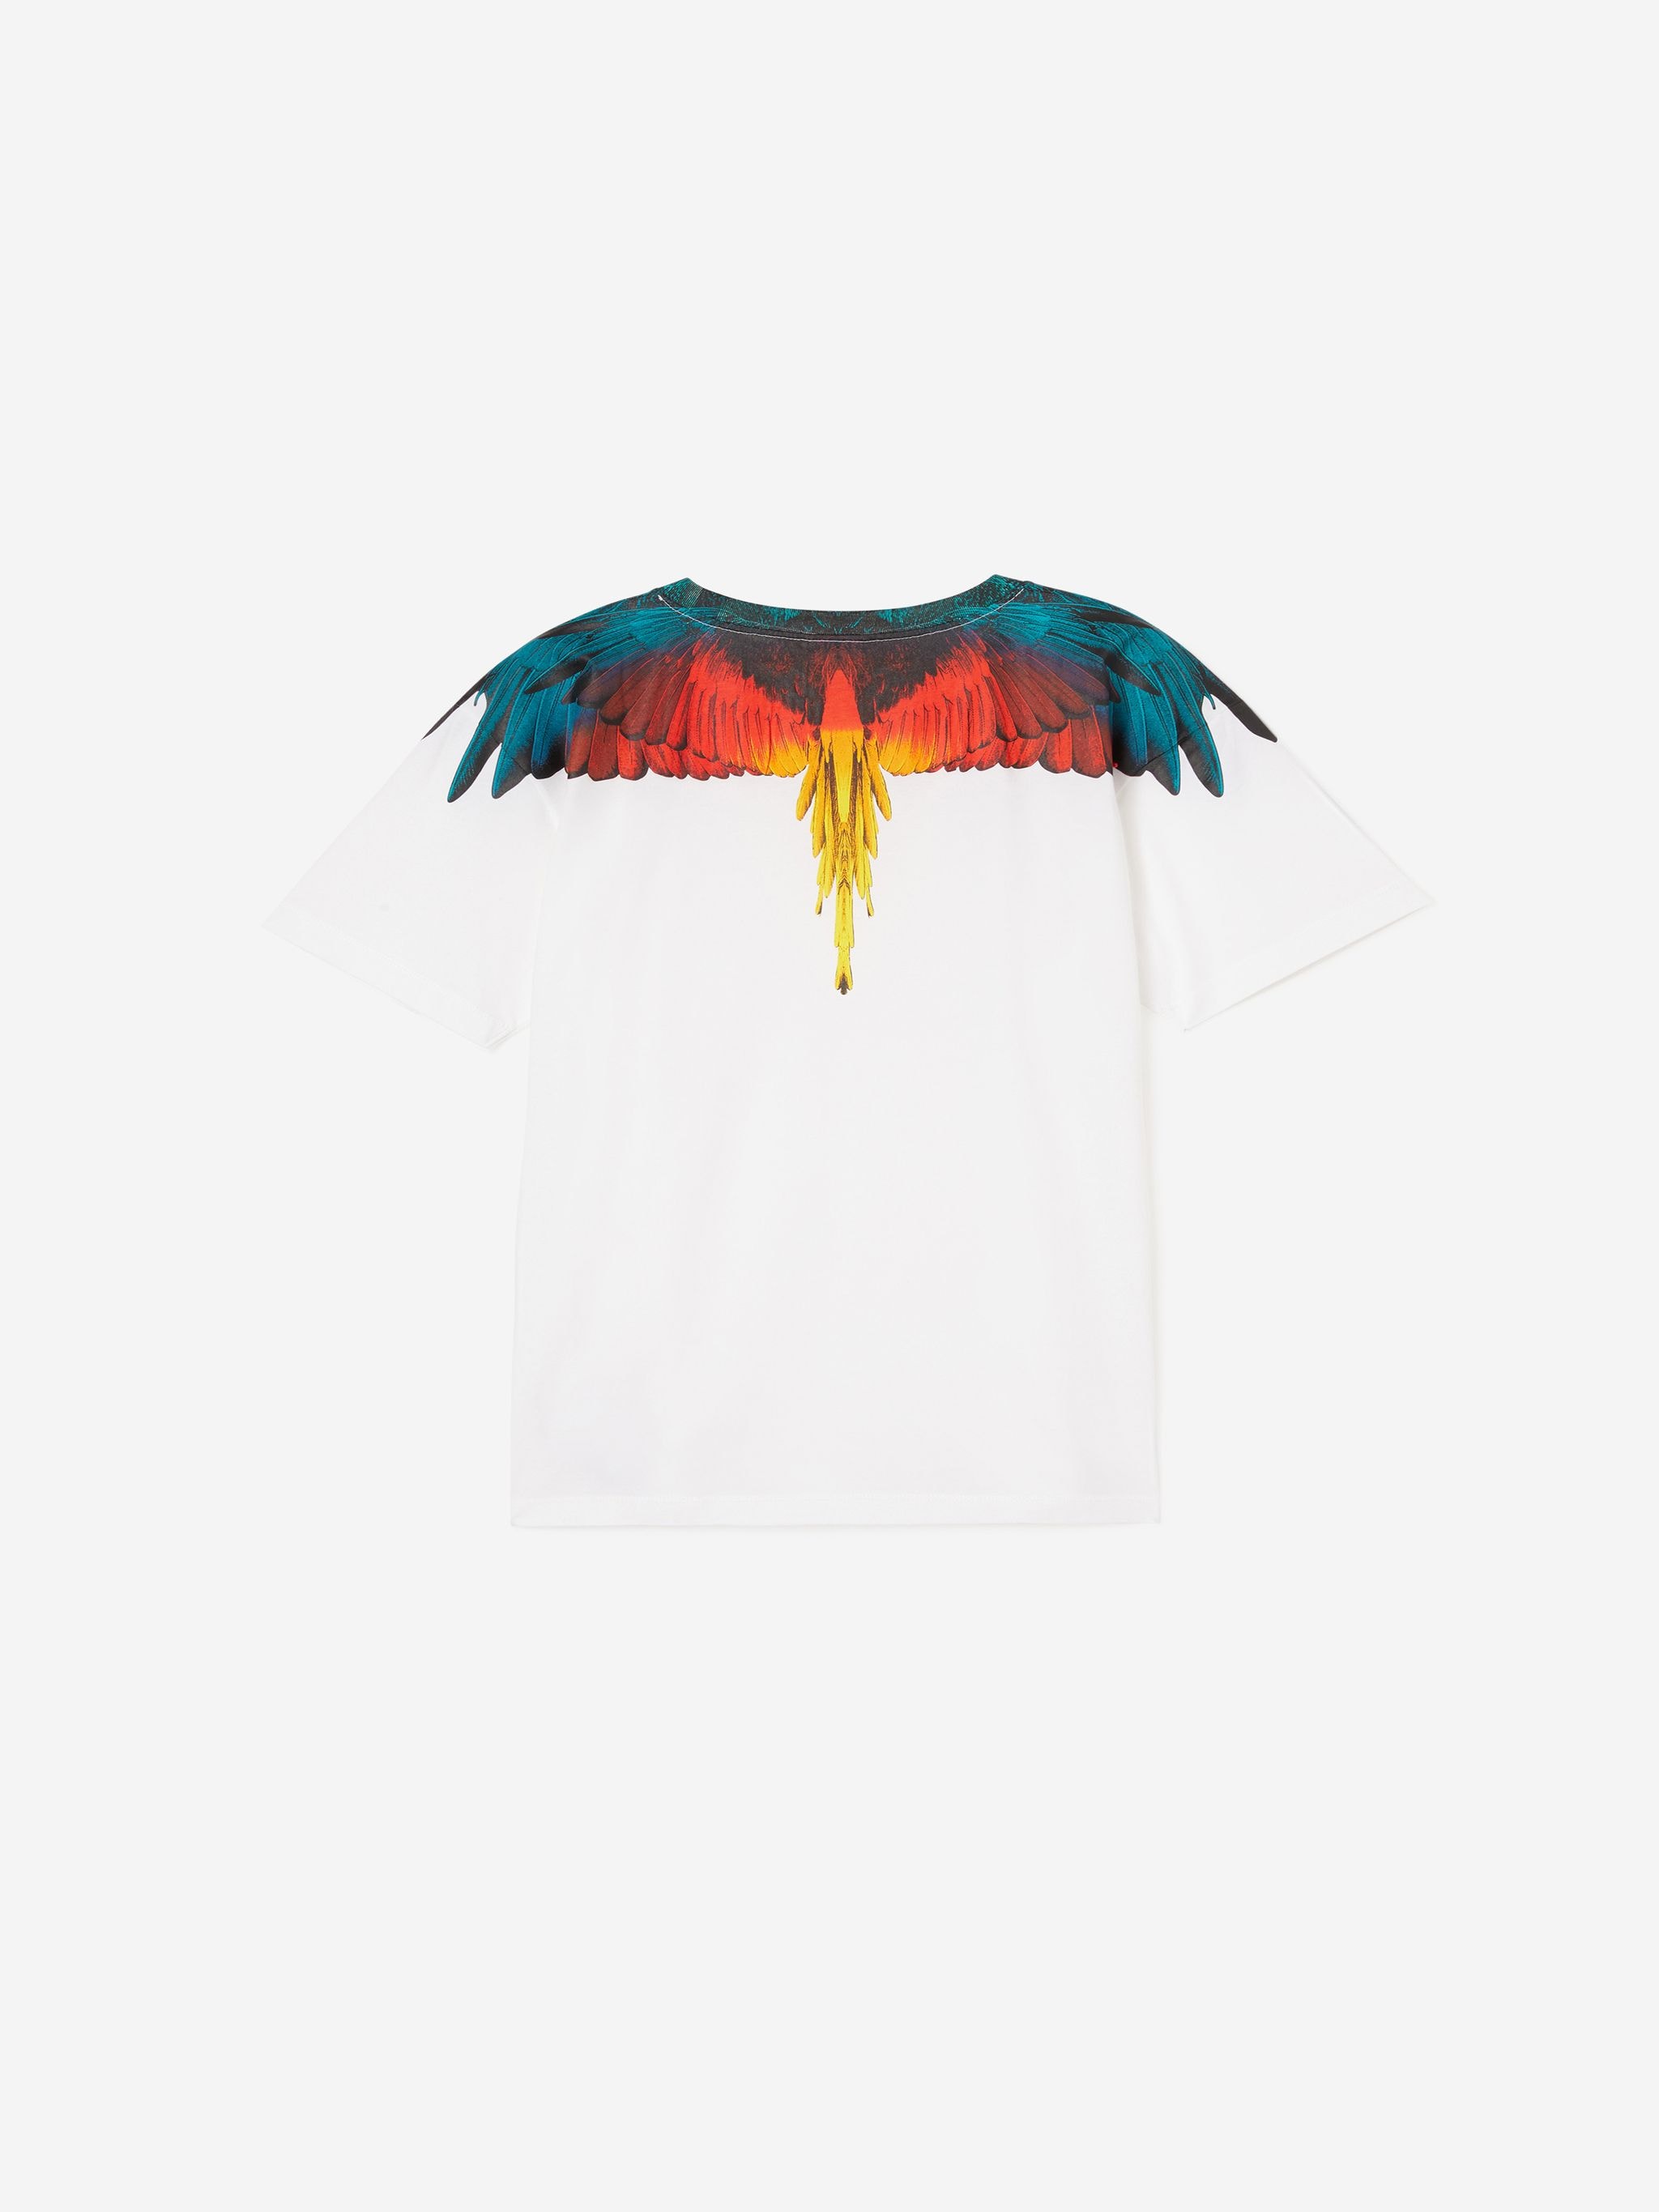 White cotton Icon Wings print T-shirt from Marcelo Burlon County of Milan featuring round neck, short sleeves, straight hem and signature Marcelo Burlon Wings print. Conscious: This item is made from at least 50% organic materials.